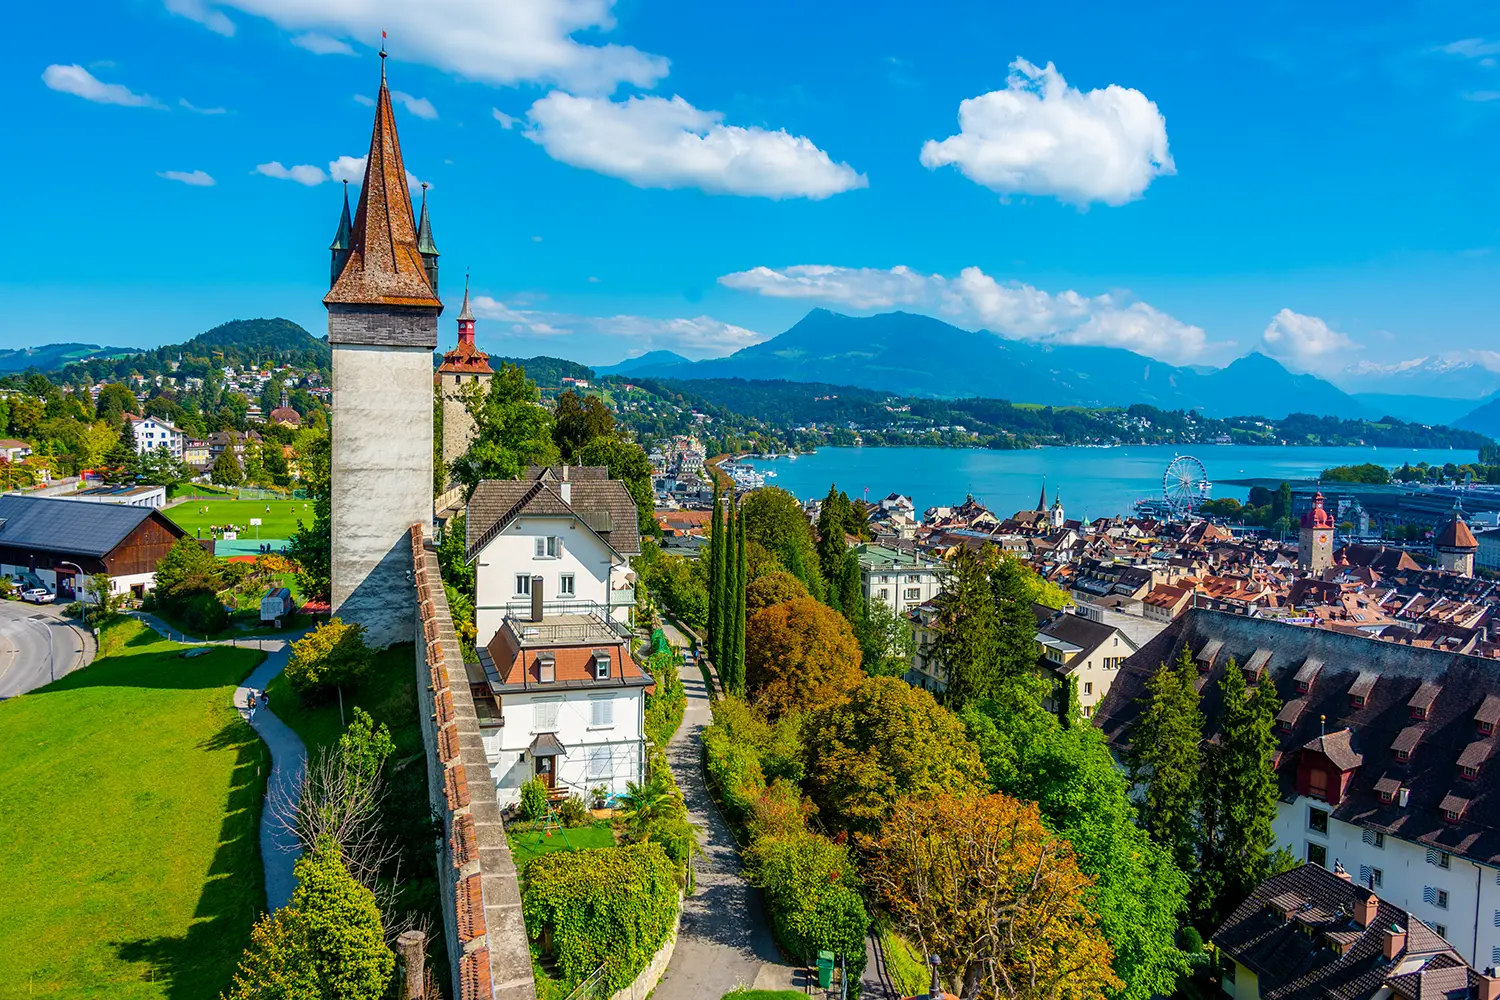 Fortification overlooking the old town of Luzern, Switzerland.